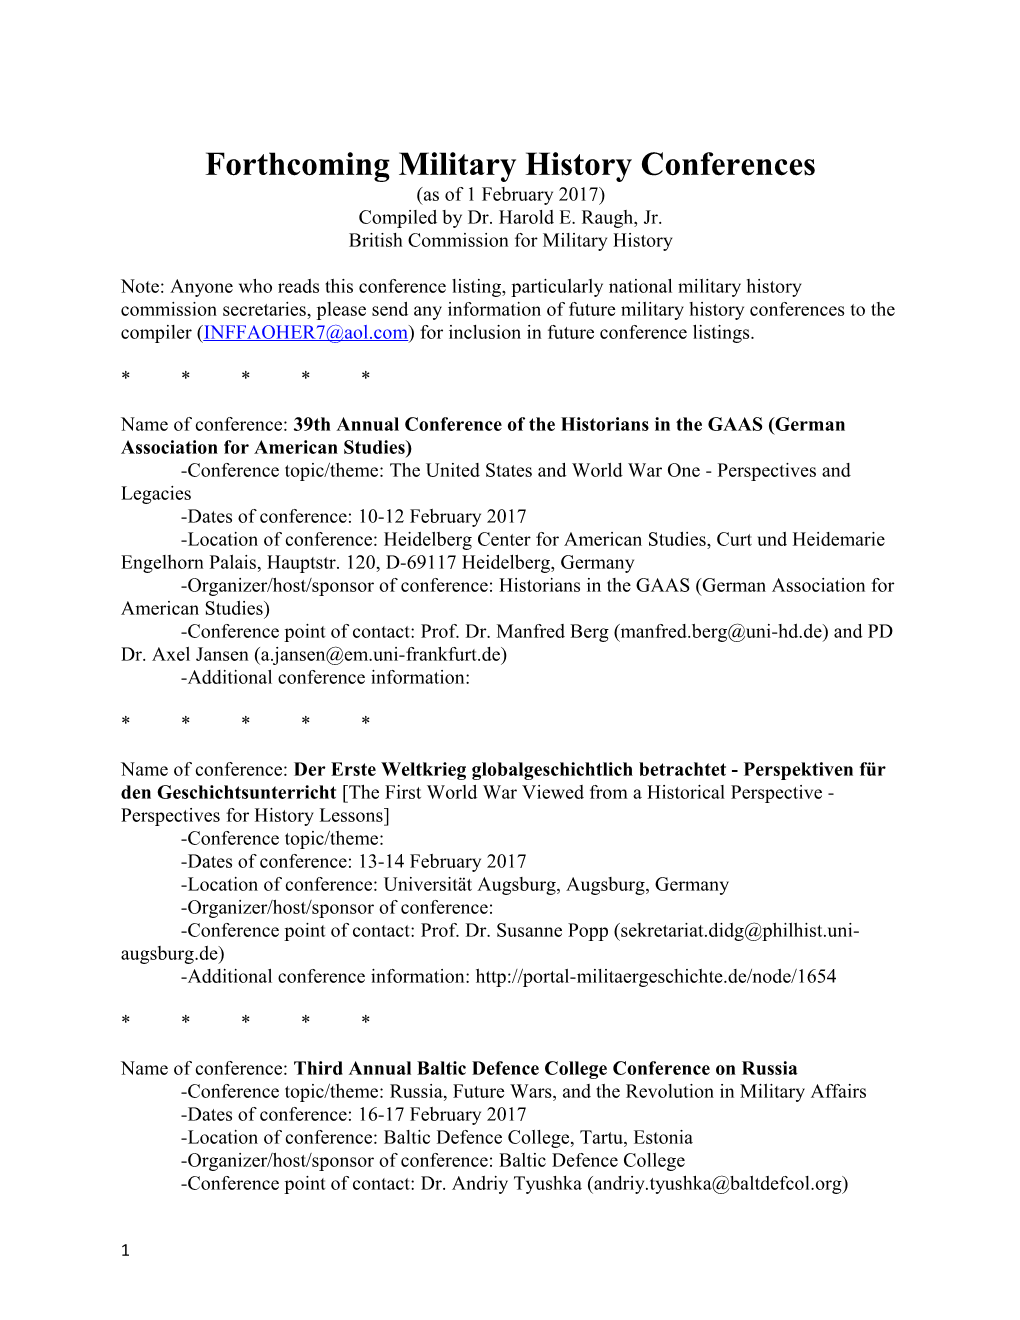 Forthcoming Military History Conferences (As of 1 February 2017) Compiled by Dr